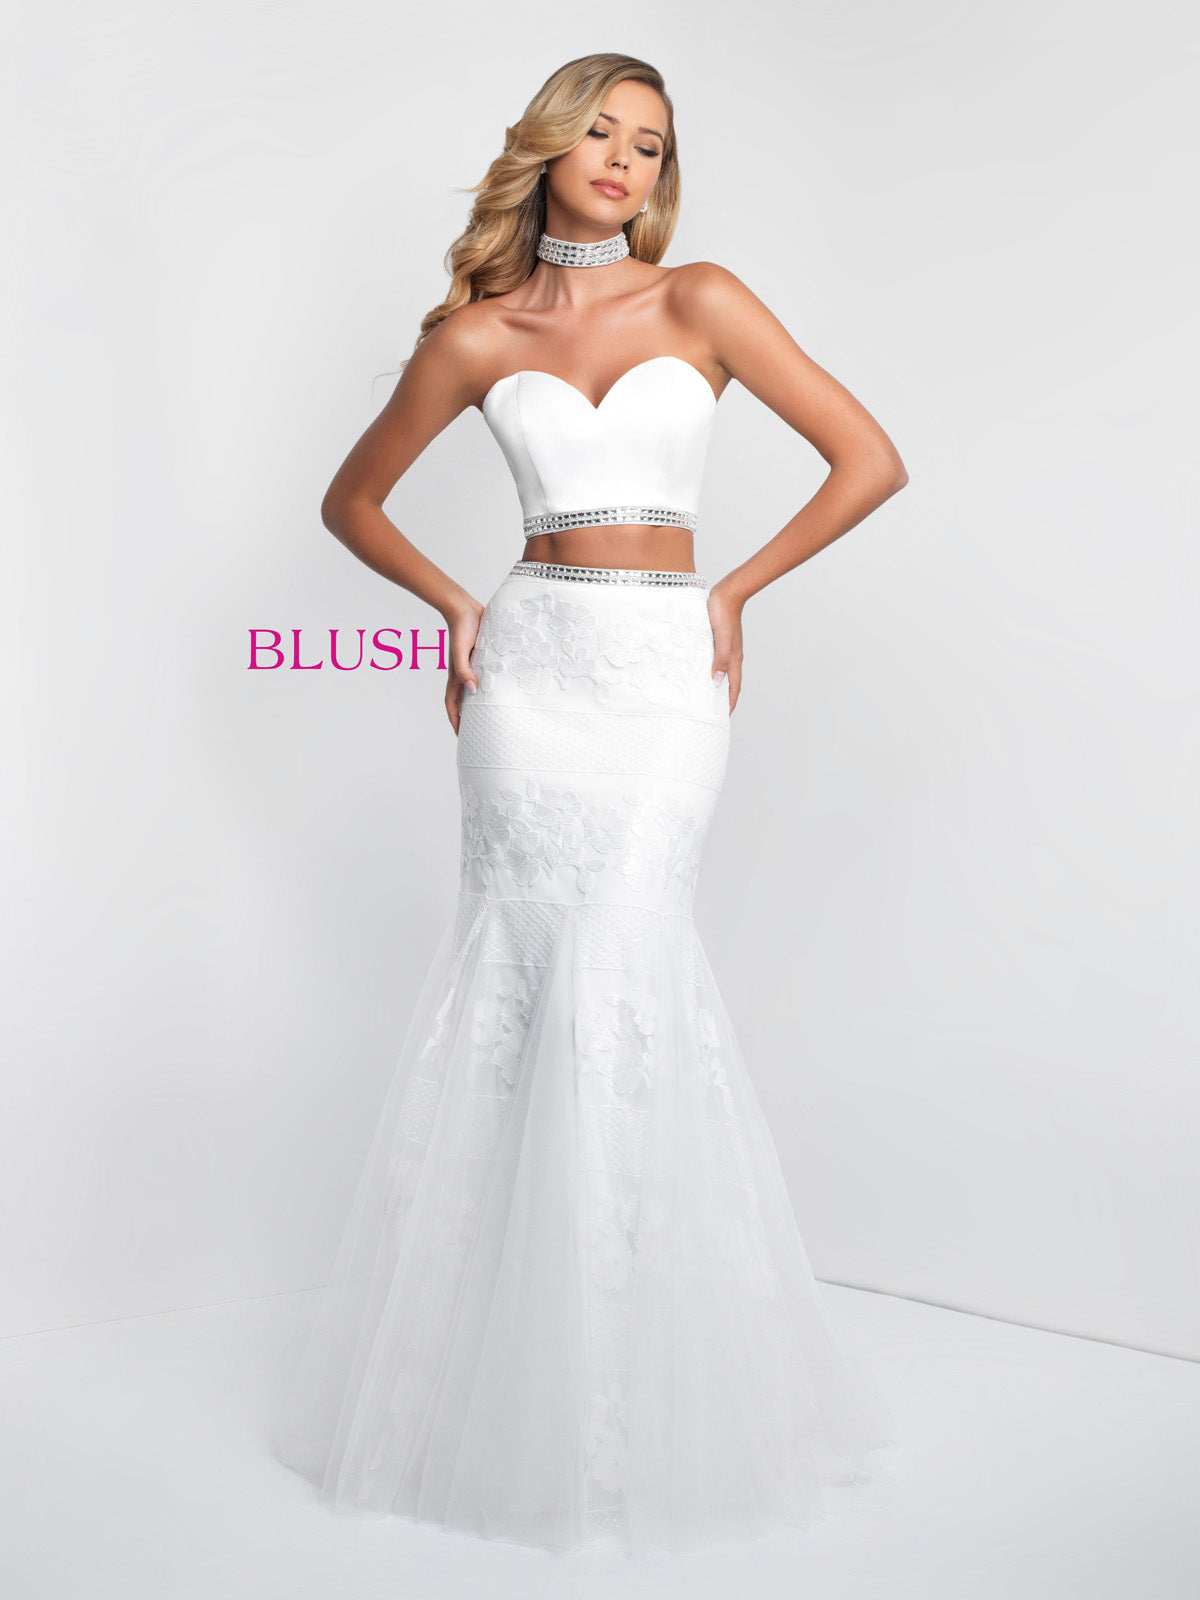 Winter Whites from Blush Prom